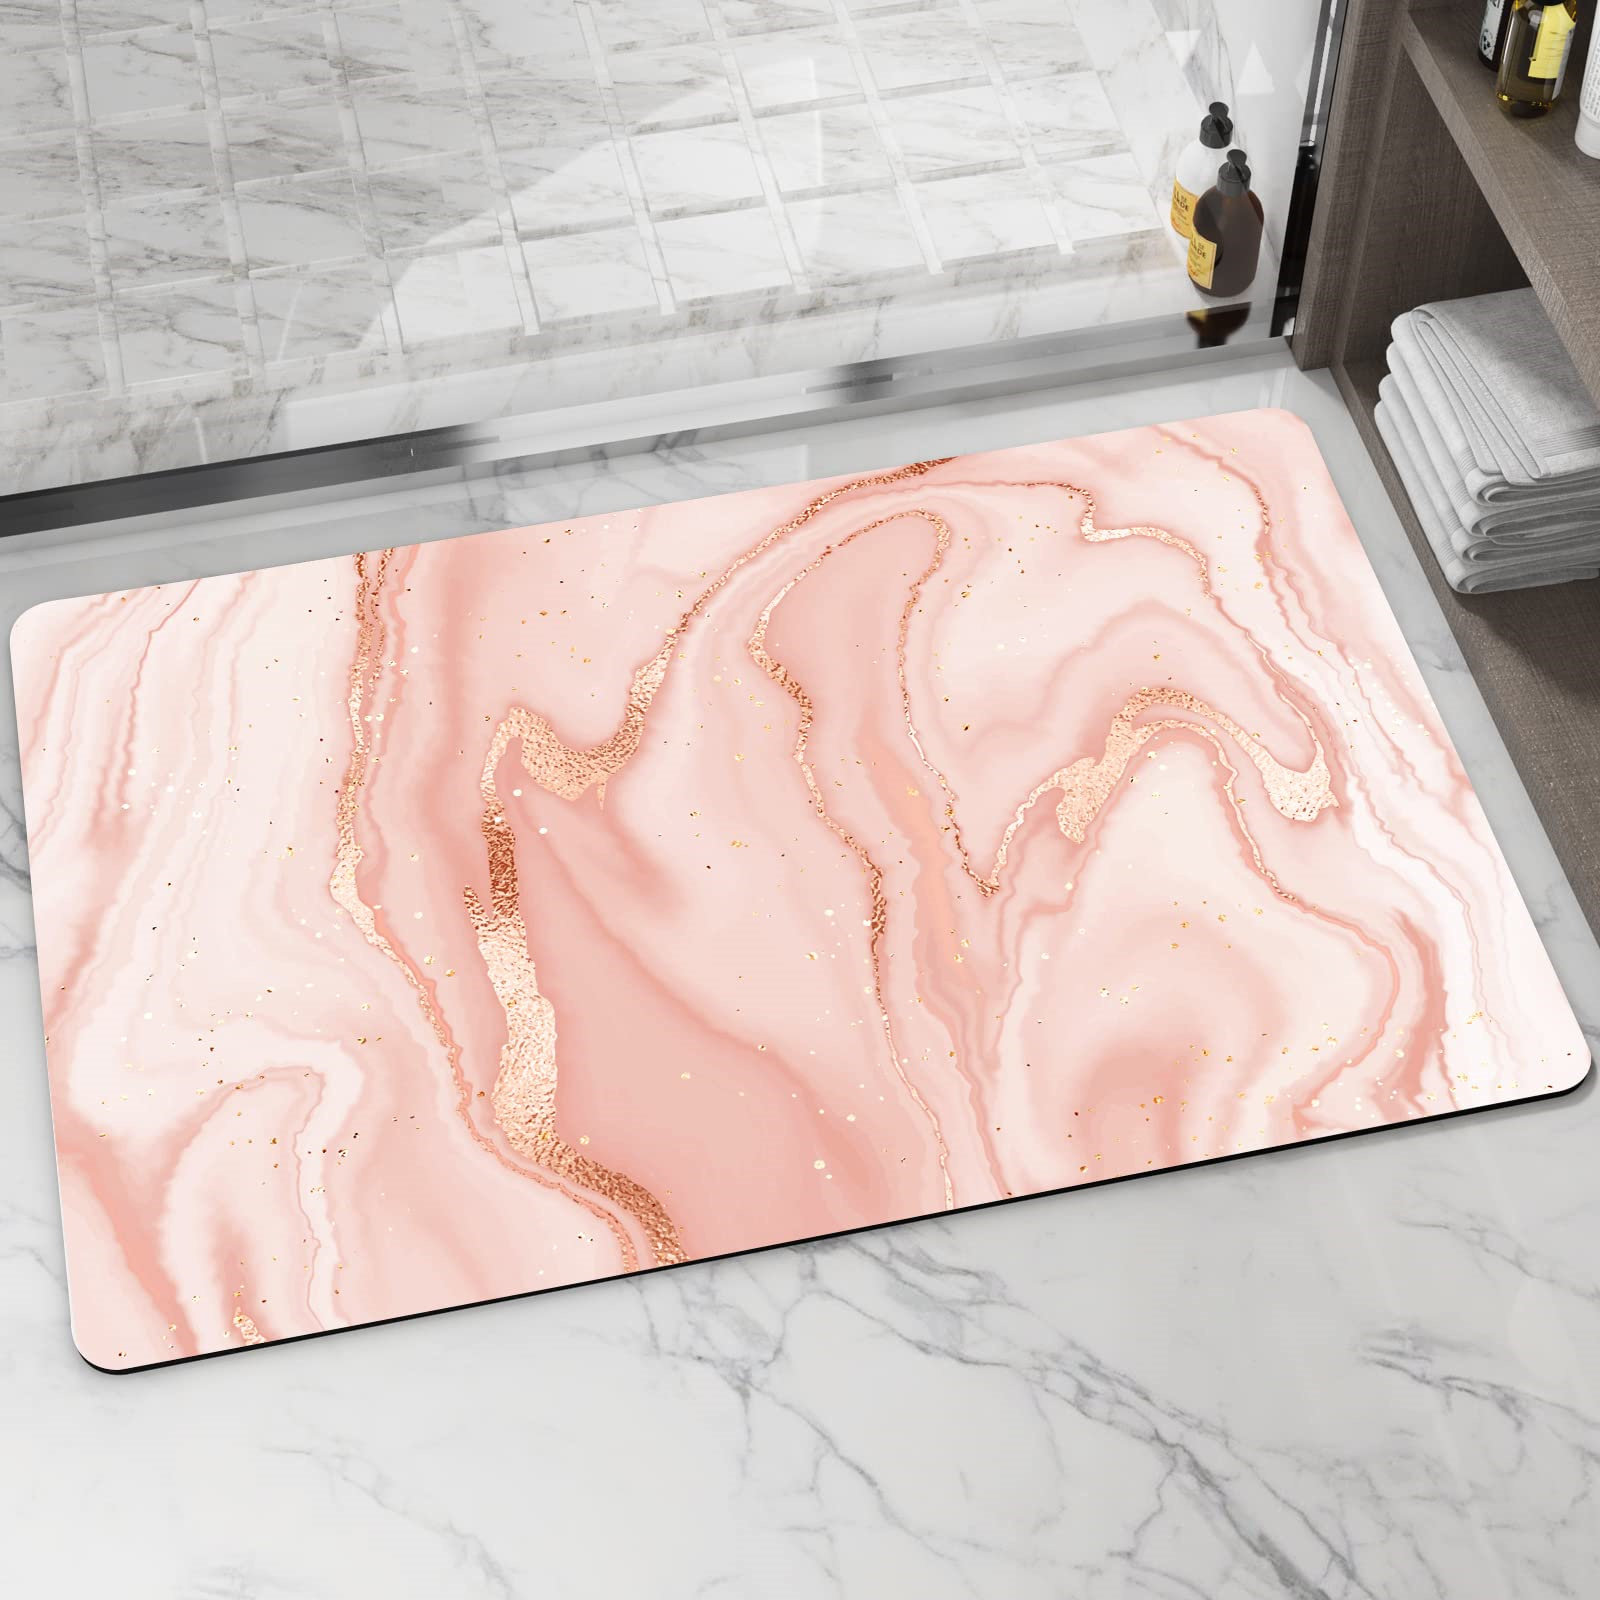 Everly Quinn Rubber Bath Mat with Non-Slip Backing